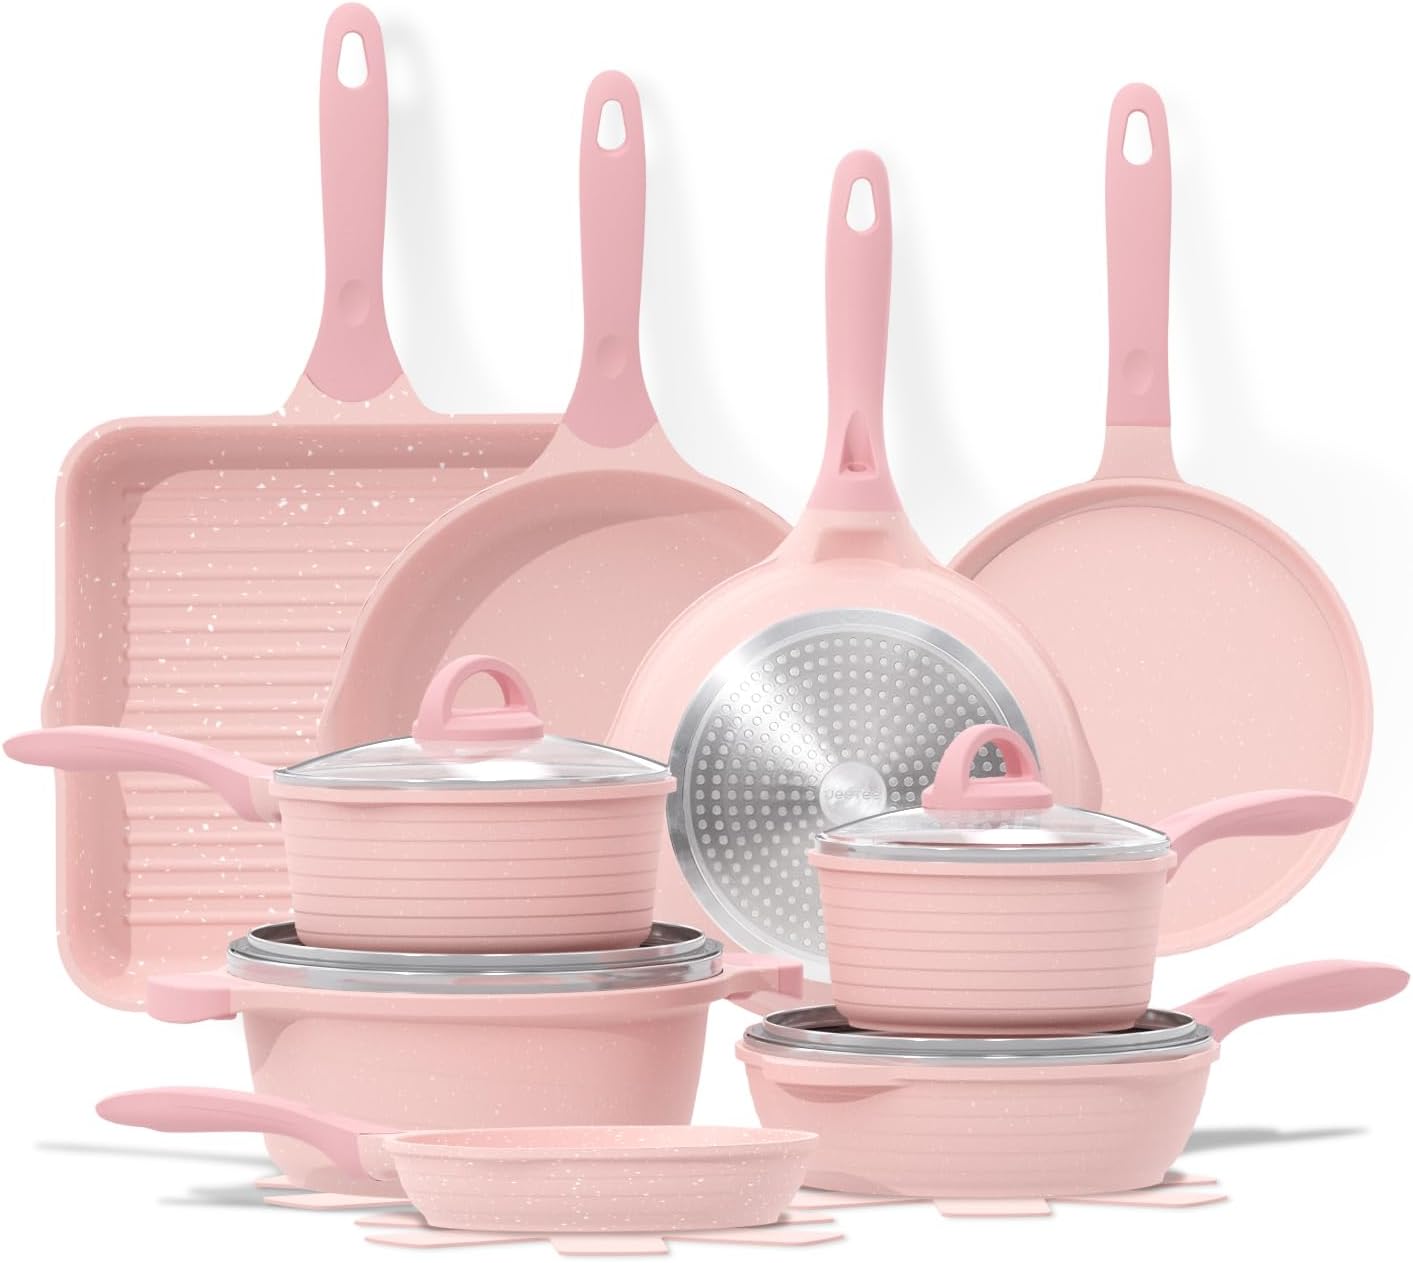 JEETEE Kitchen Pots and Pans Set Nonstick Review